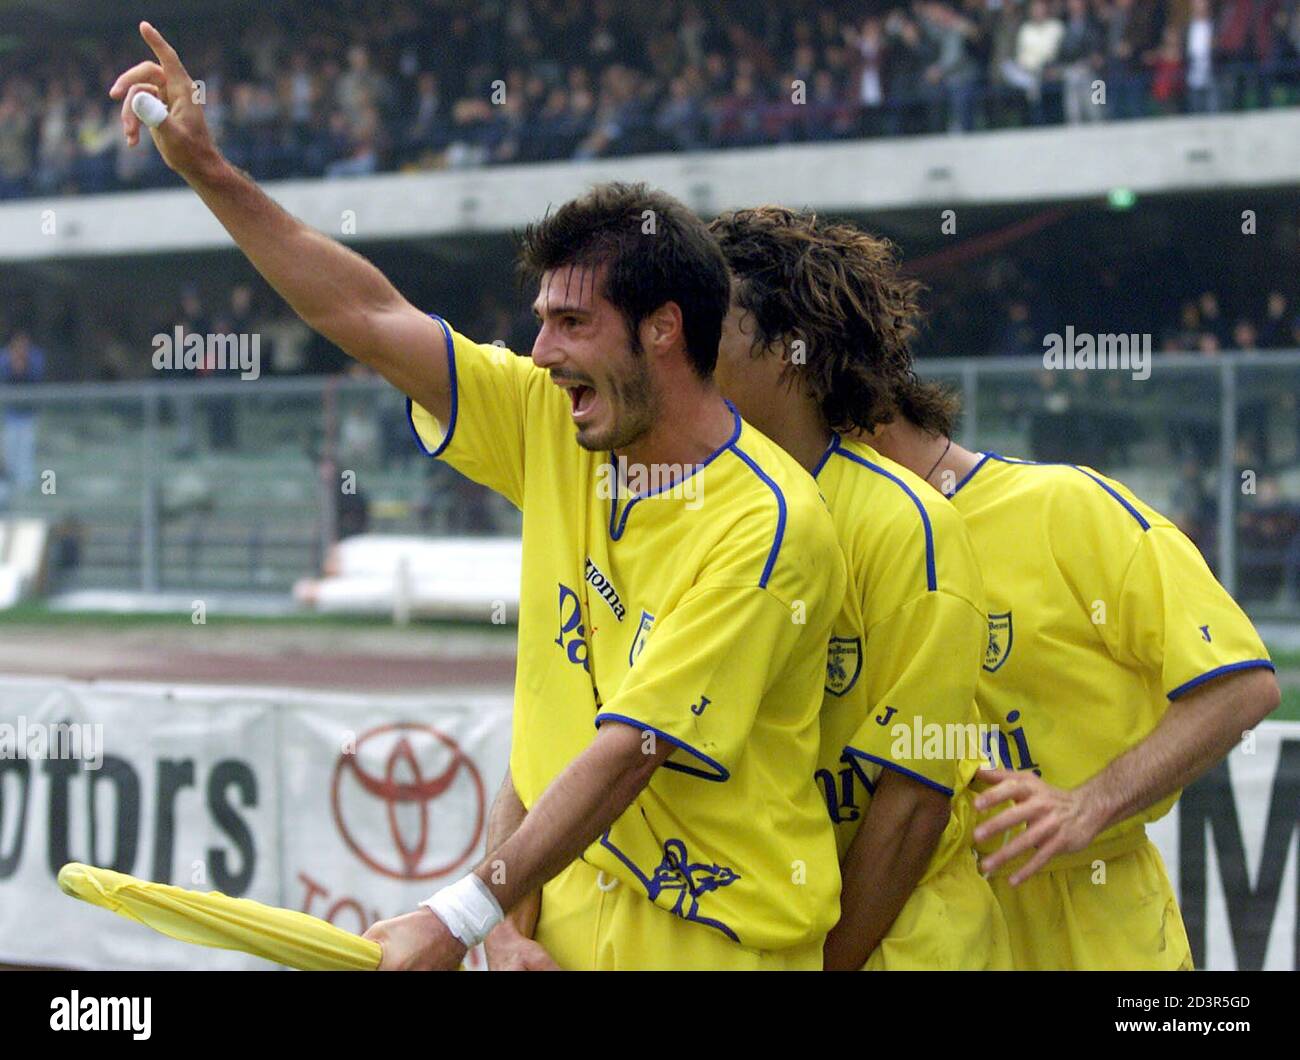 Chievo's Massimo Marazzina (L) celebrates after scoring against Torino with  team mate Bernardo Corradi (C) during their Serie A soccer match in Verona  October 28, 2001. Chievo is currently leading the Serie